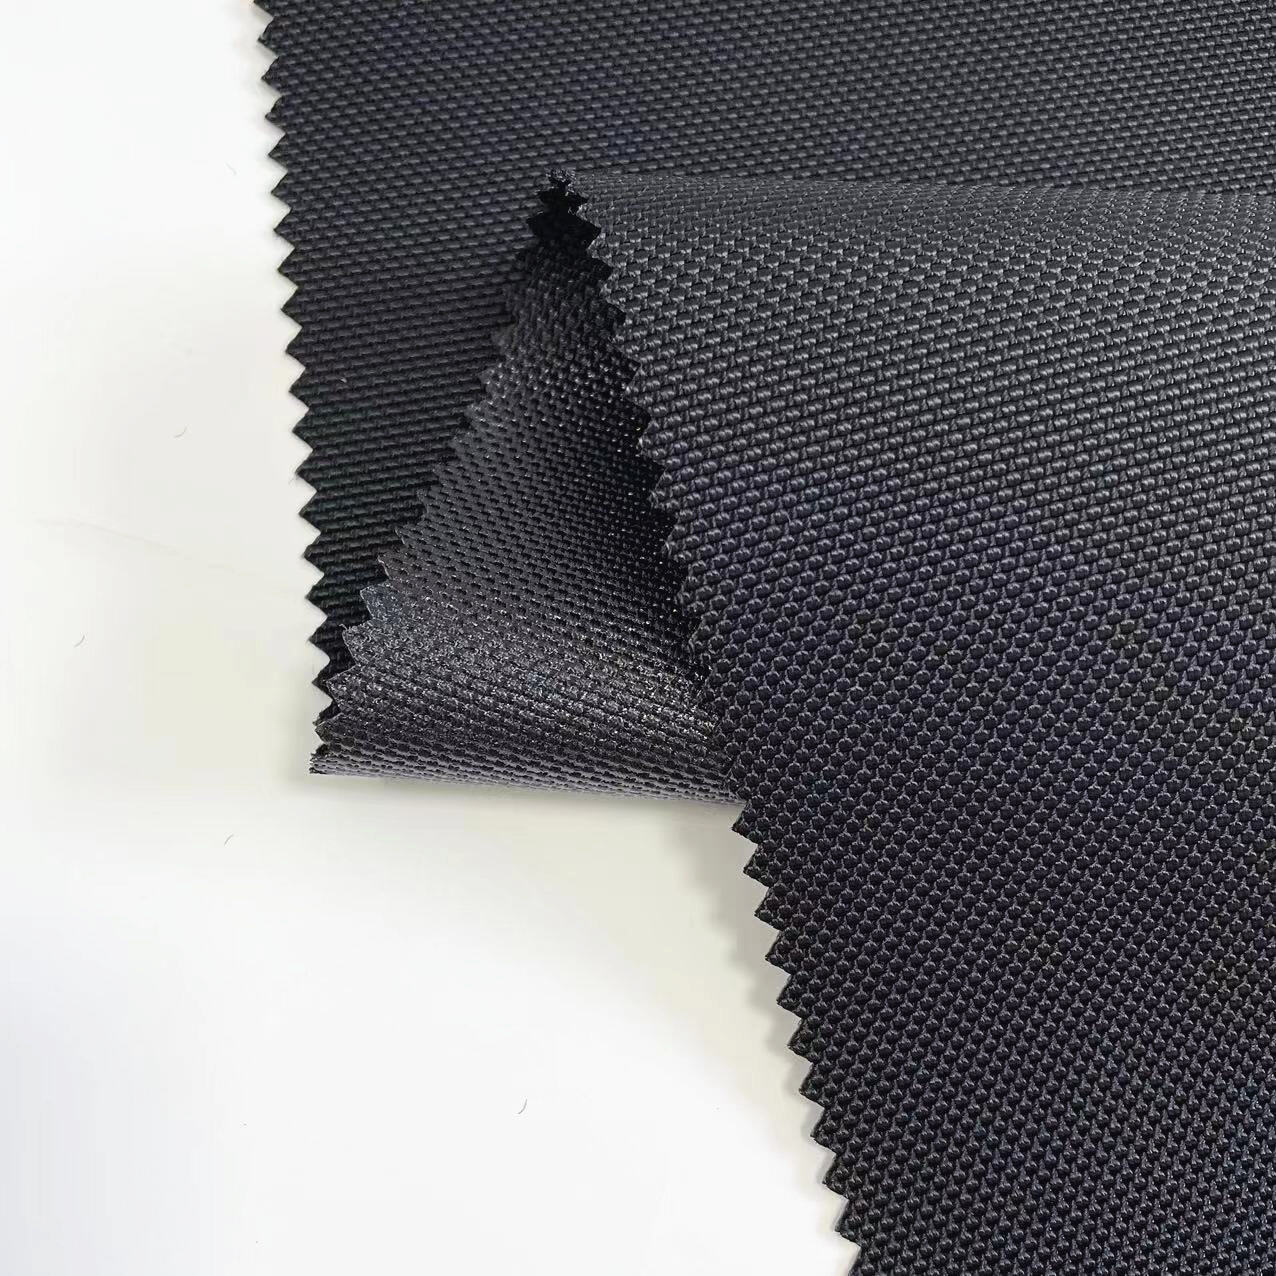 1050 Denier Coated ballistic nylon fabric with Durable Water Repellent Finish